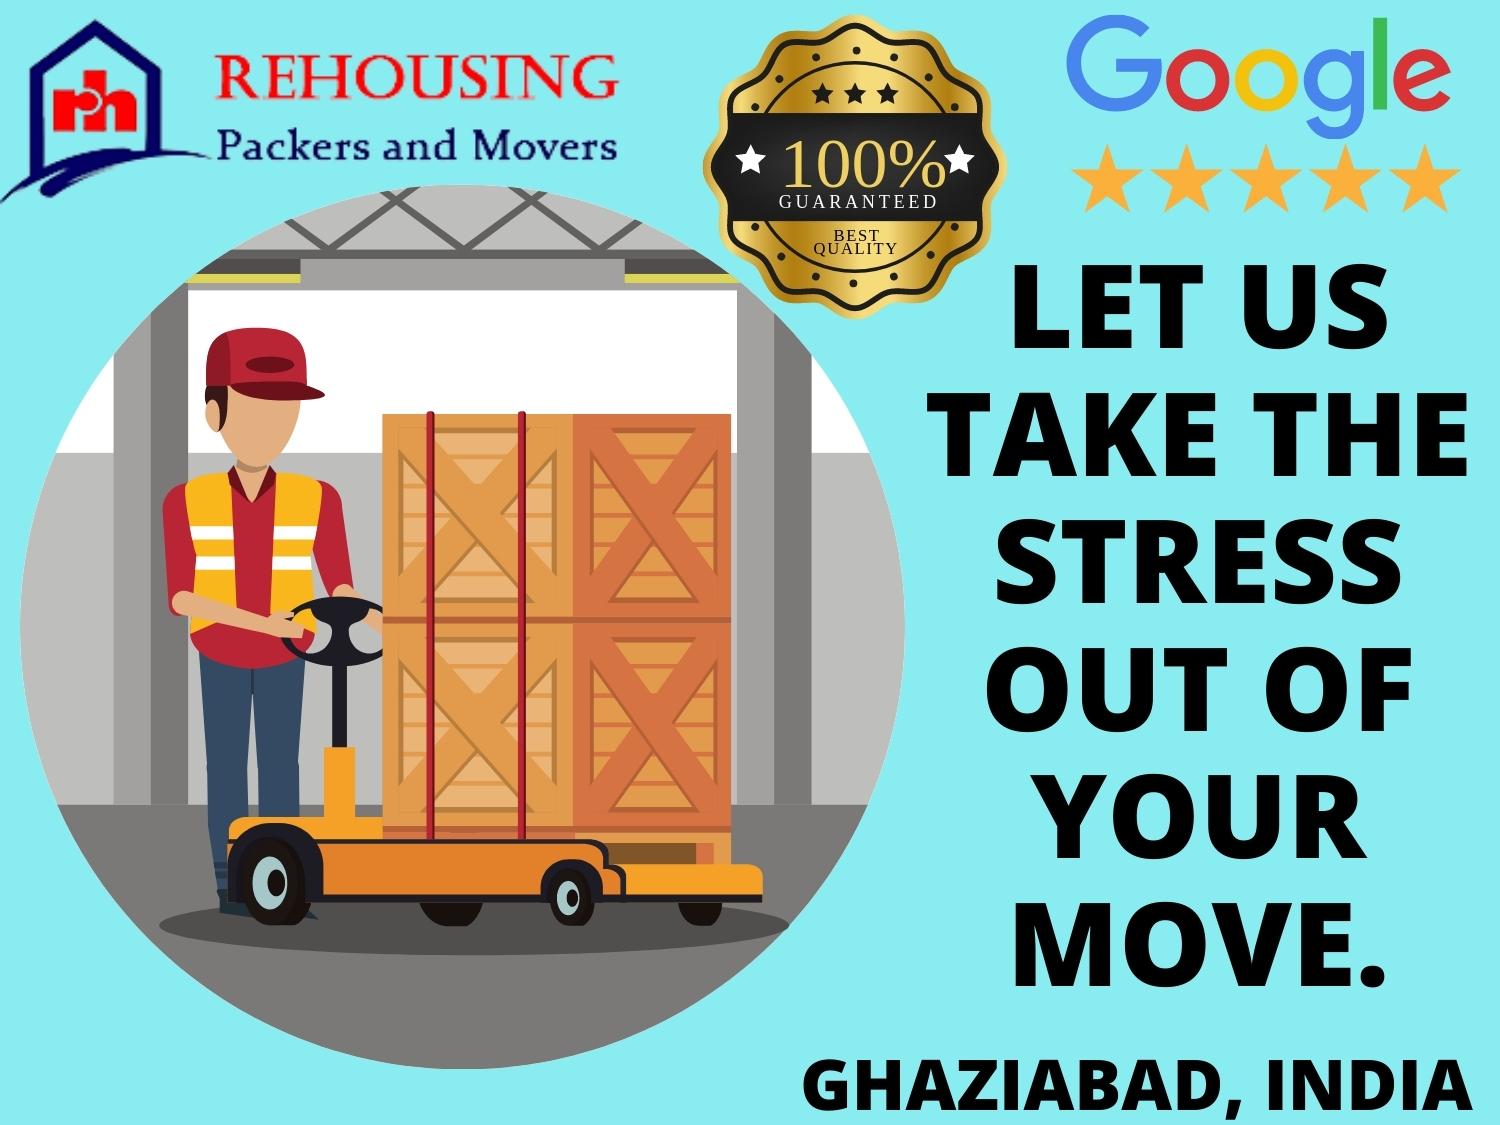 Hire our international packers and movers in Ghaziabad